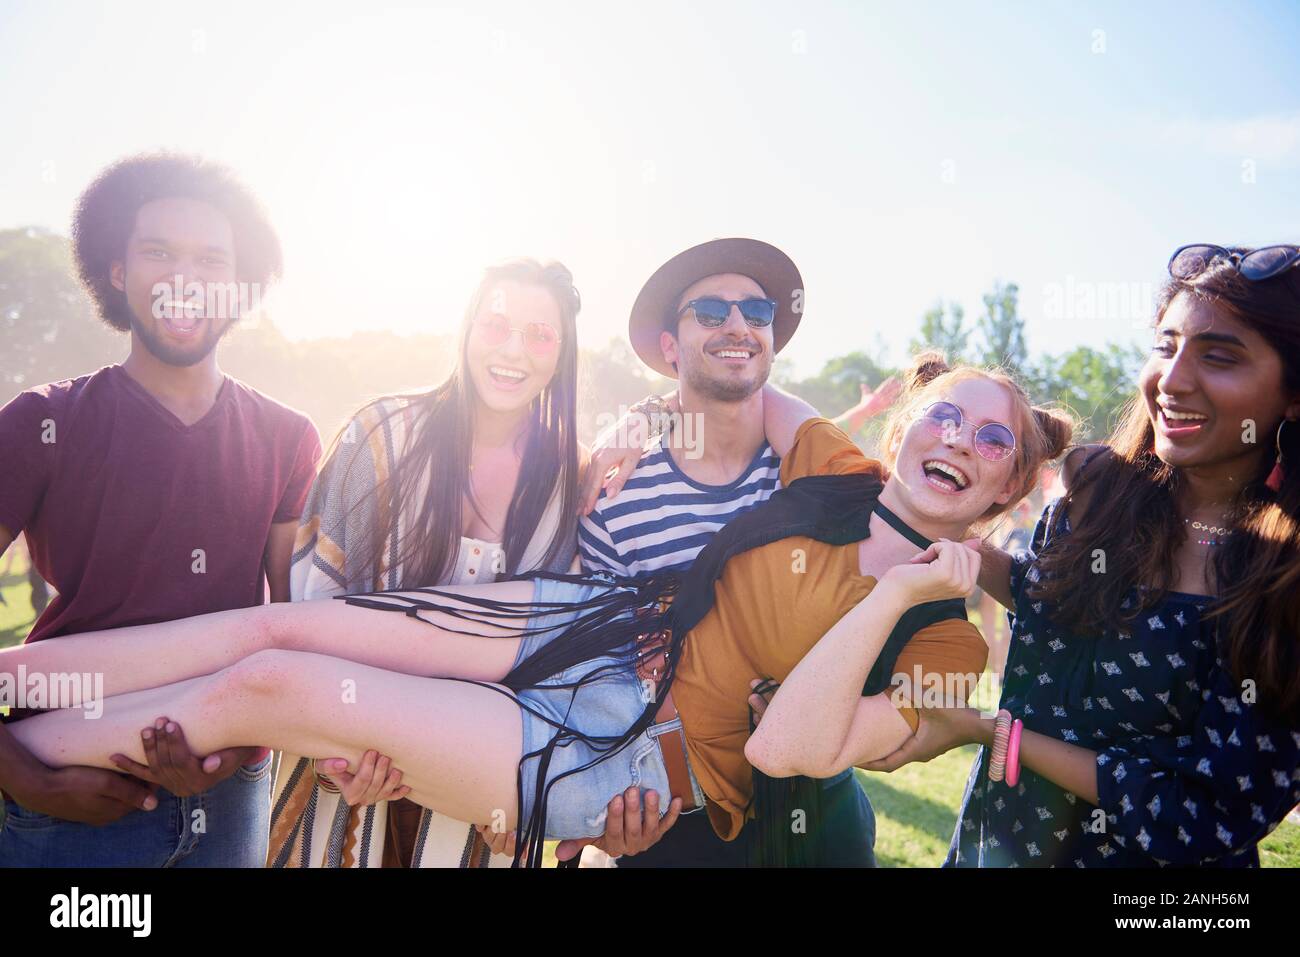 Group of people having fun outdoors Stock Photo